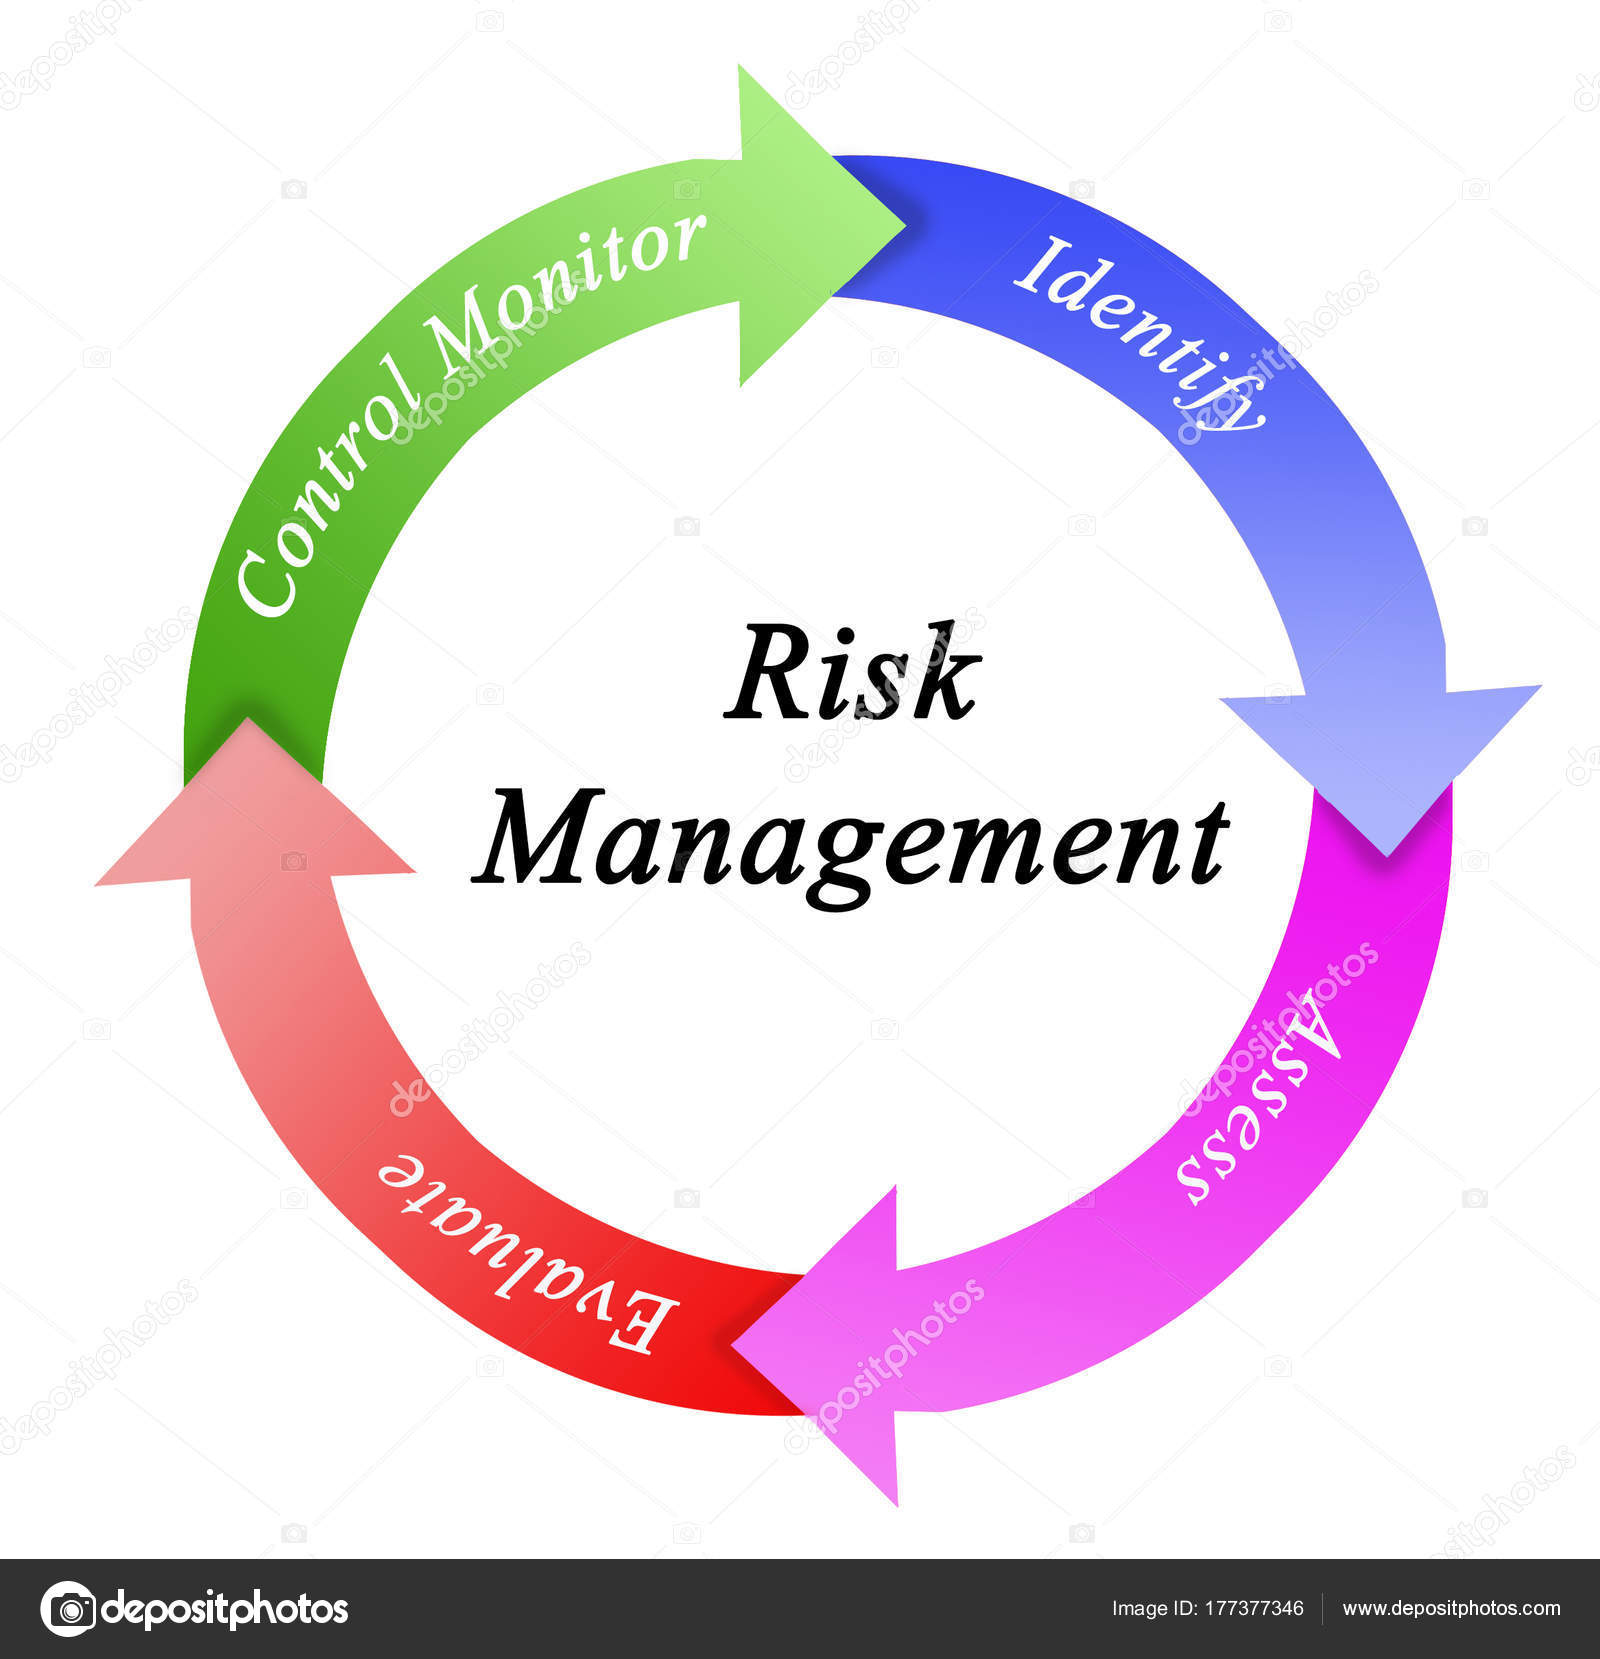 Components Of Risk Management Process Stock Photo By ©vaeenma 177377346